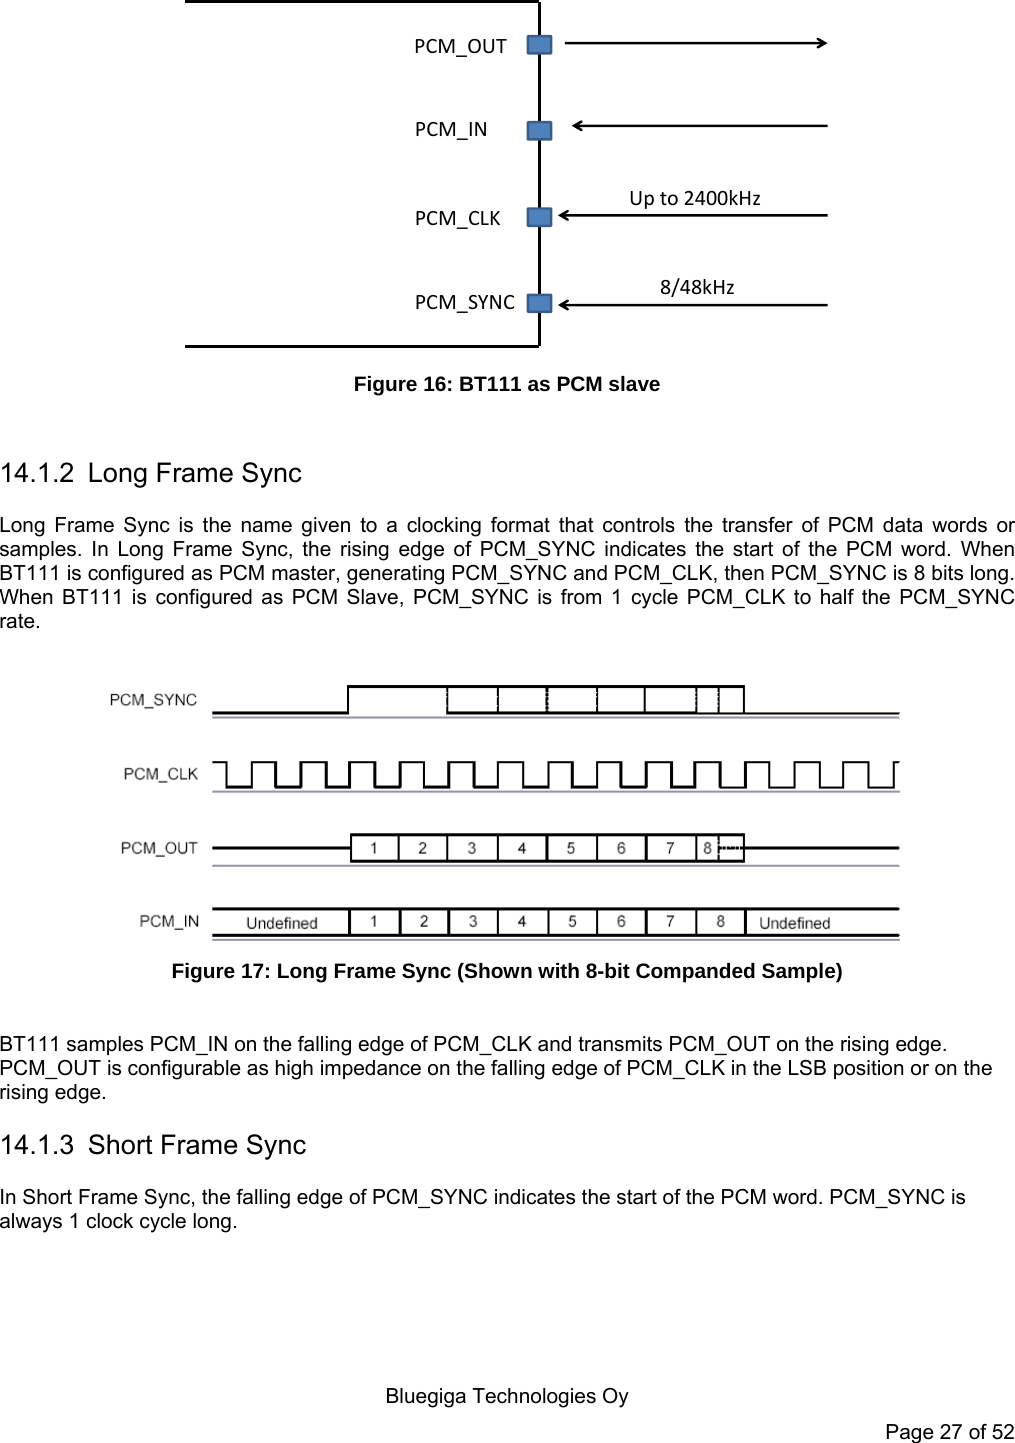    Bluegiga Technologies Oy Page 27 of 52 PCM_OUTPCM_INPCM_CLKPCM_SYNCUp to 2400kHz8/48kHz Figure 16: BT111 as PCM slave  14.1.2  Long Frame Sync Long Frame Sync is the name given to a clocking format that controls the transfer of PCM data words or samples. In Long Frame Sync, the rising edge of PCM_SYNC indicates the start of the PCM word. When BT111 is configured as PCM master, generating PCM_SYNC and PCM_CLK, then PCM_SYNC is 8 bits long. When BT111 is configured as PCM Slave, PCM_SYNC is from 1 cycle PCM_CLK to half the PCM_SYNC rate.   Figure 17: Long Frame Sync (Shown with 8-bit Companded Sample)  BT111 samples PCM_IN on the falling edge of PCM_CLK and transmits PCM_OUT on the rising edge. PCM_OUT is configurable as high impedance on the falling edge of PCM_CLK in the LSB position or on the rising edge. 14.1.3  Short Frame Sync In Short Frame Sync, the falling edge of PCM_SYNC indicates the start of the PCM word. PCM_SYNC is always 1 clock cycle long.  